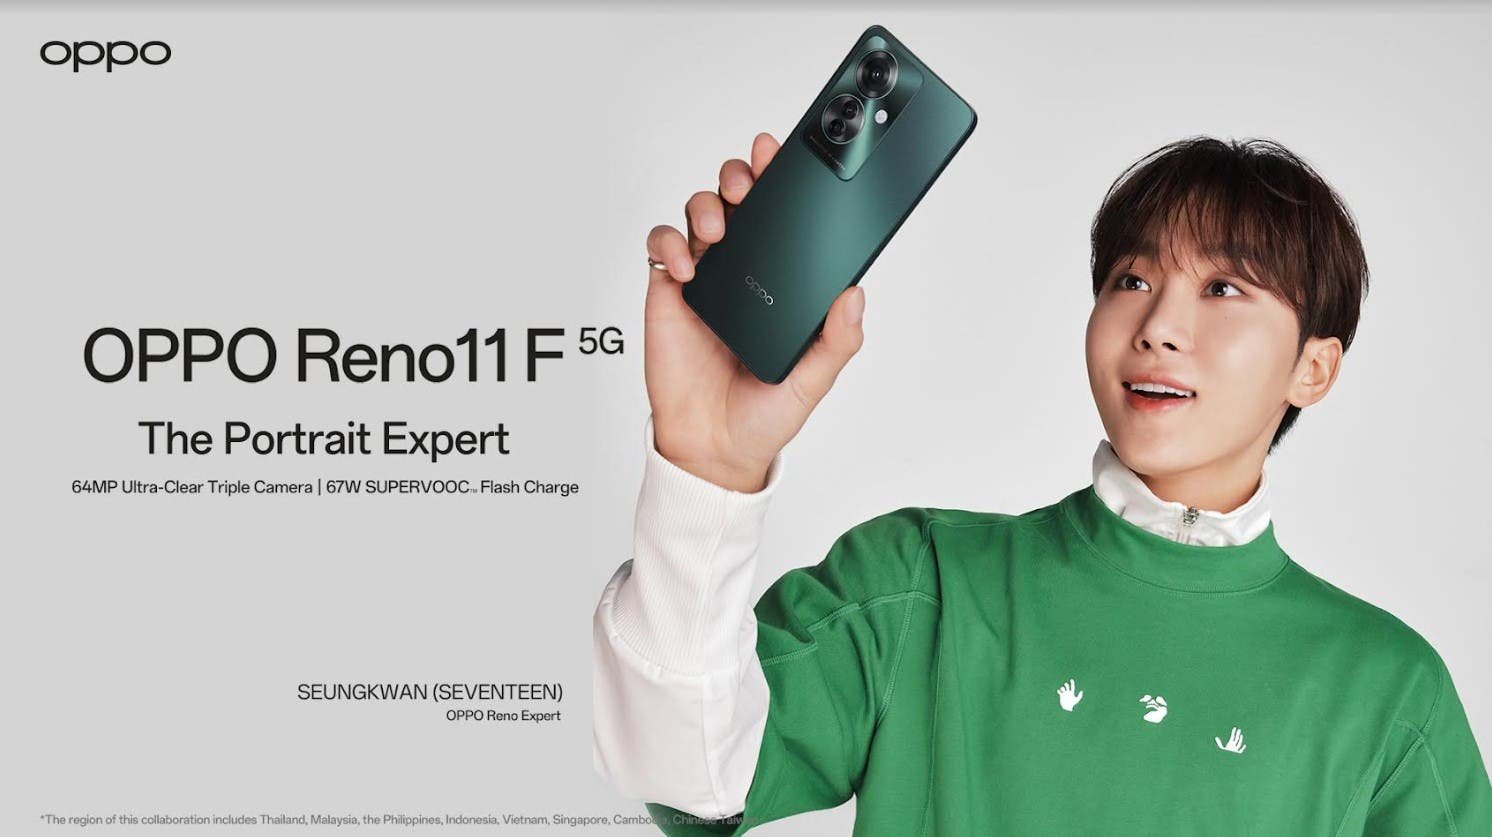 Kpop Artists BSS SEVENTEEN are the Newest OPPO Reno Experts